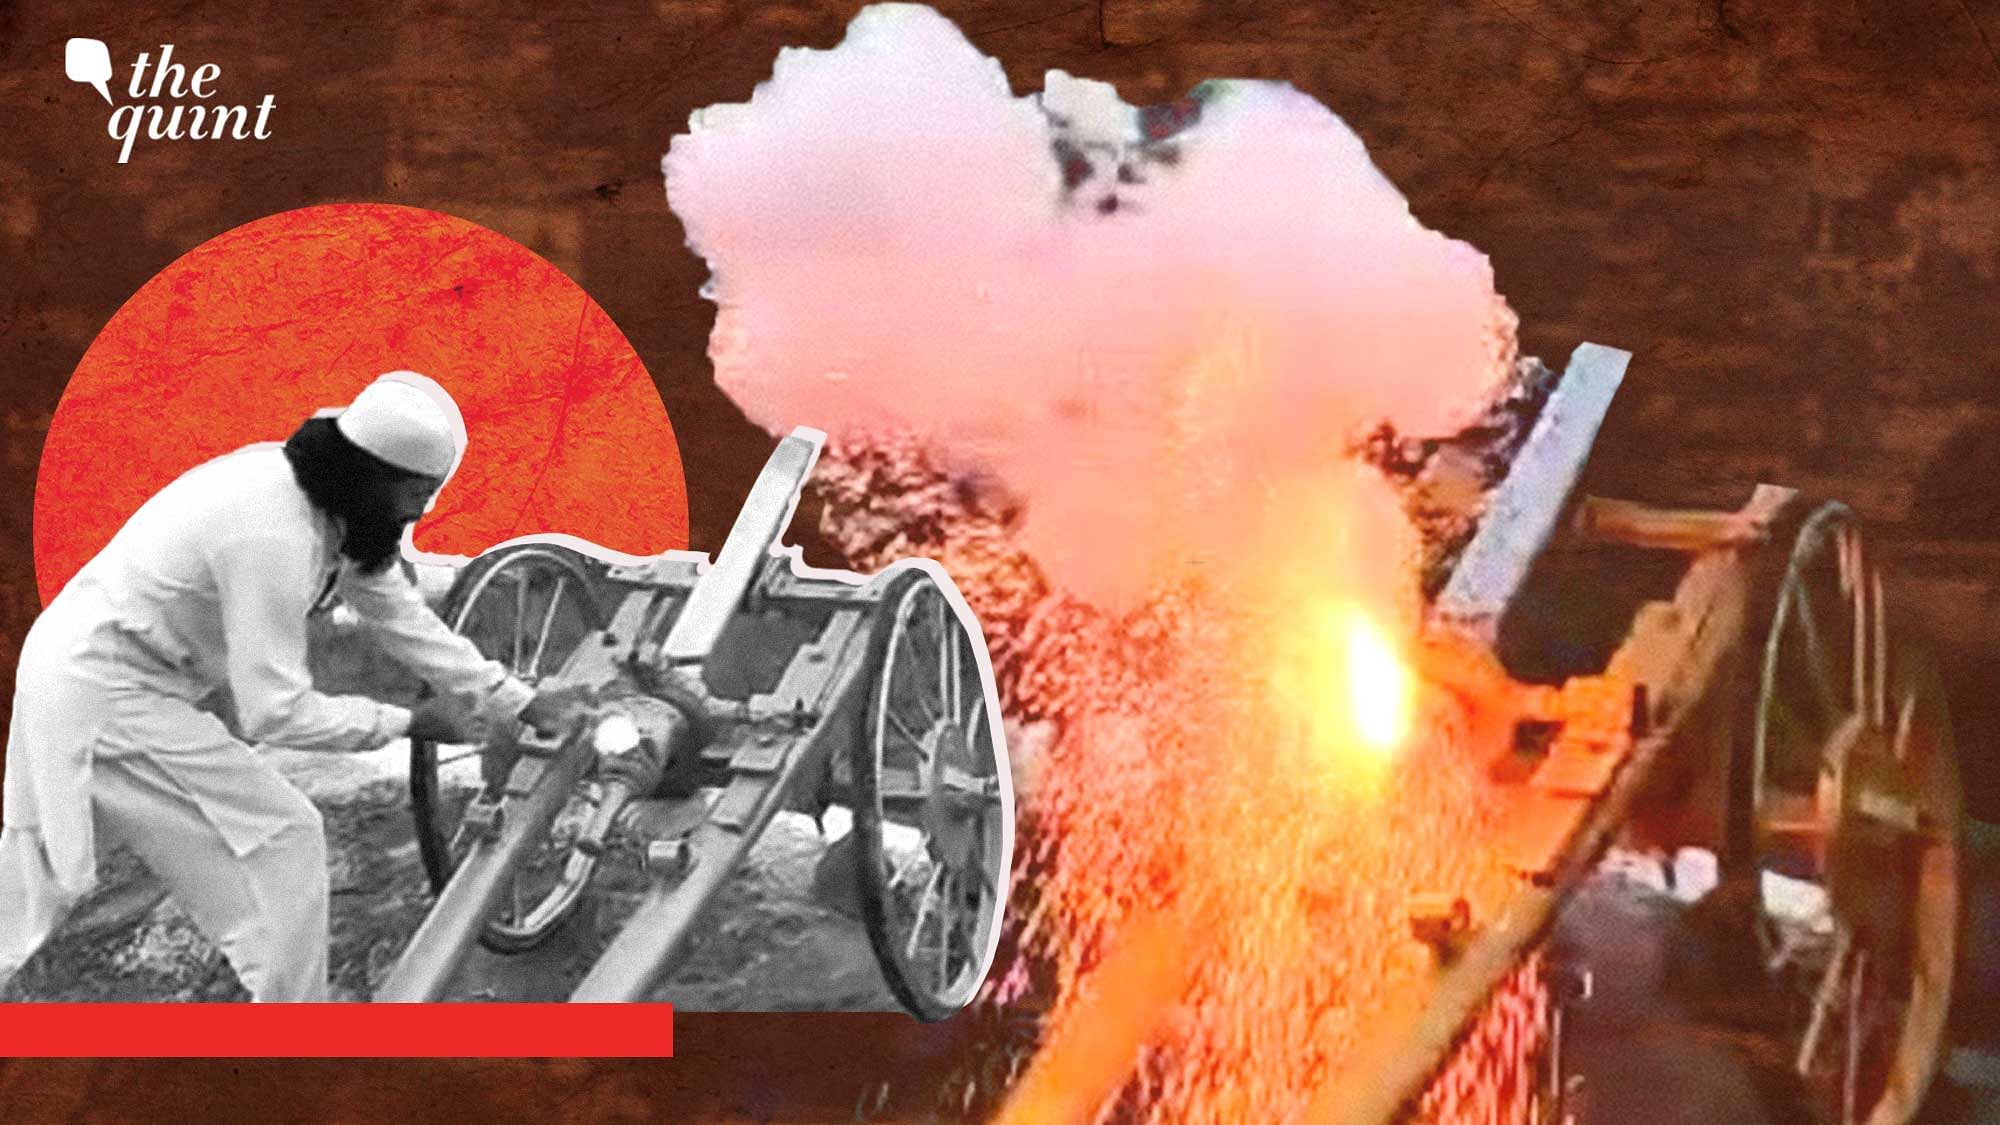 <div class="paragraphs"><p>As the day-long Ramadan fast comes to an end, the residents of <a href="https://www.thequint.com/topic/madhya-pradesh">Madhya Pradesh's</a> Raisen district are greeted with a loud bang of a cannon, which is fired from red from the <a href="https://www.thequint.com/news/india/communal-clash-in-madhya-pradesh-raisen-what-happened-between-tribals-and-muslims">Raisen</a> Fort every day of the holy month.</p></div>